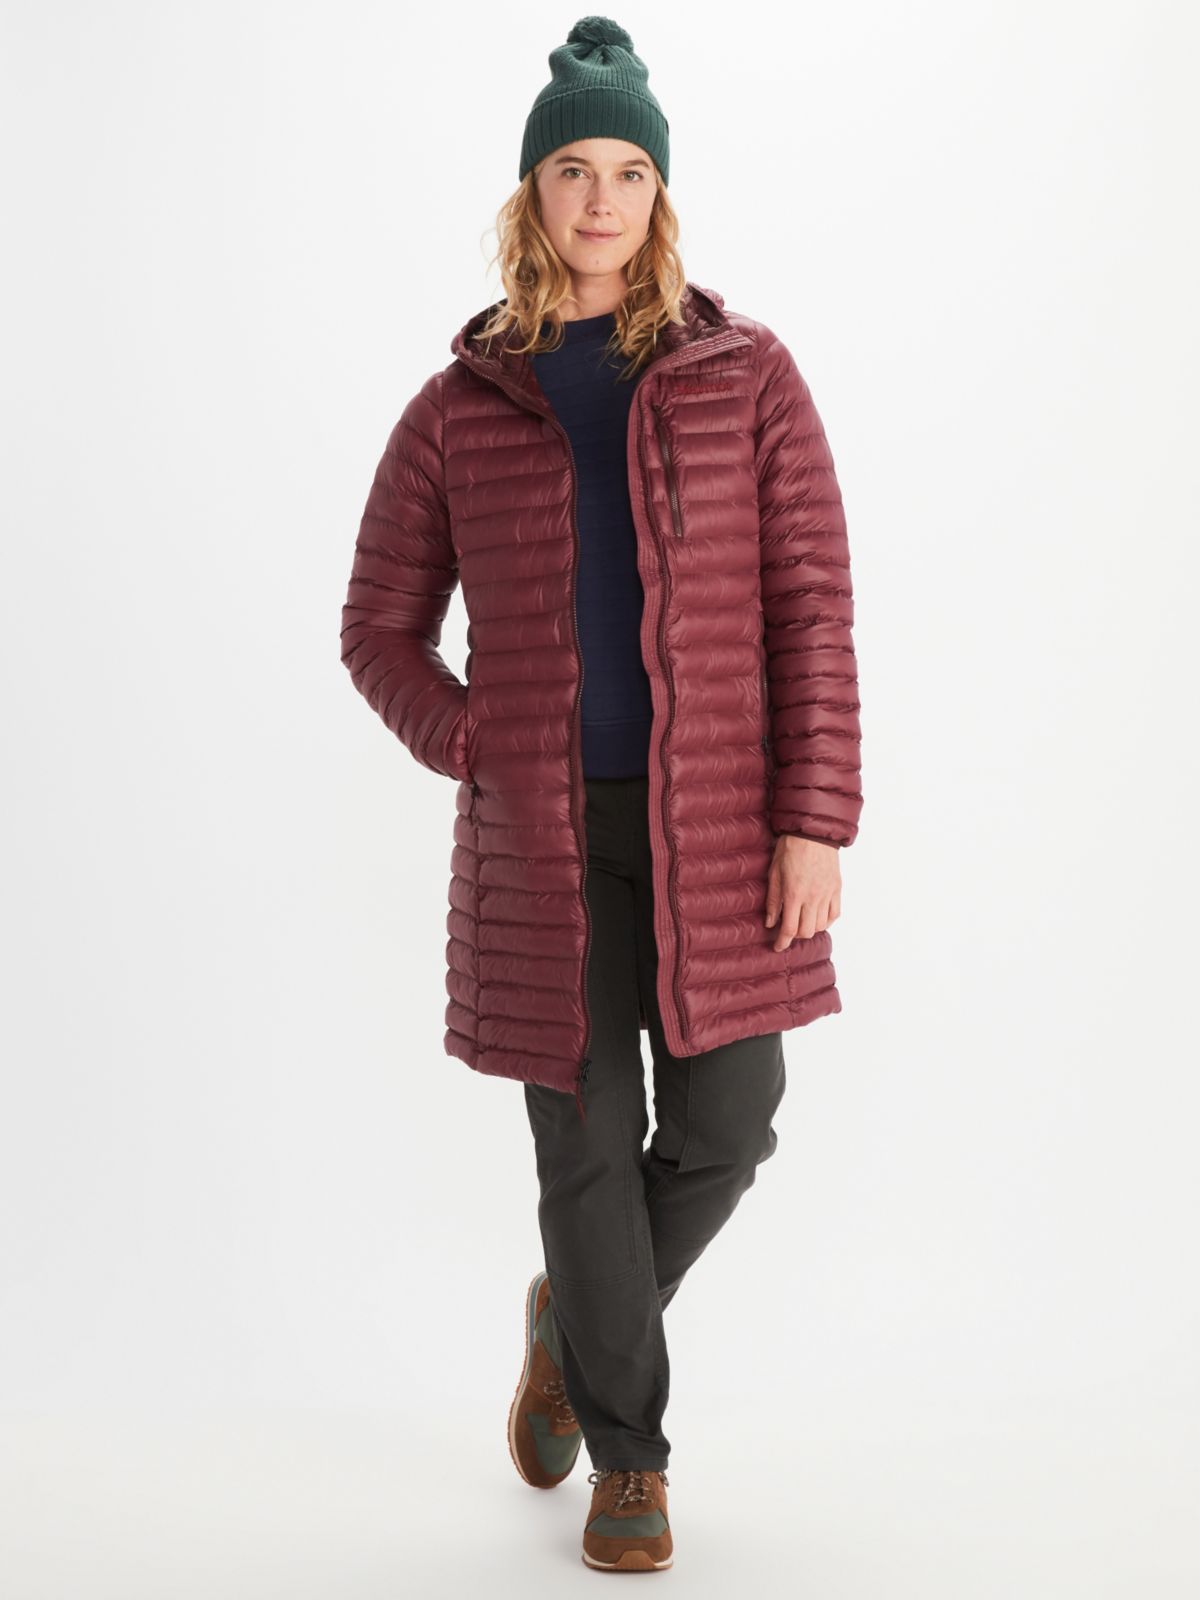 female model wearing assorted outdoor clothing for colder weather